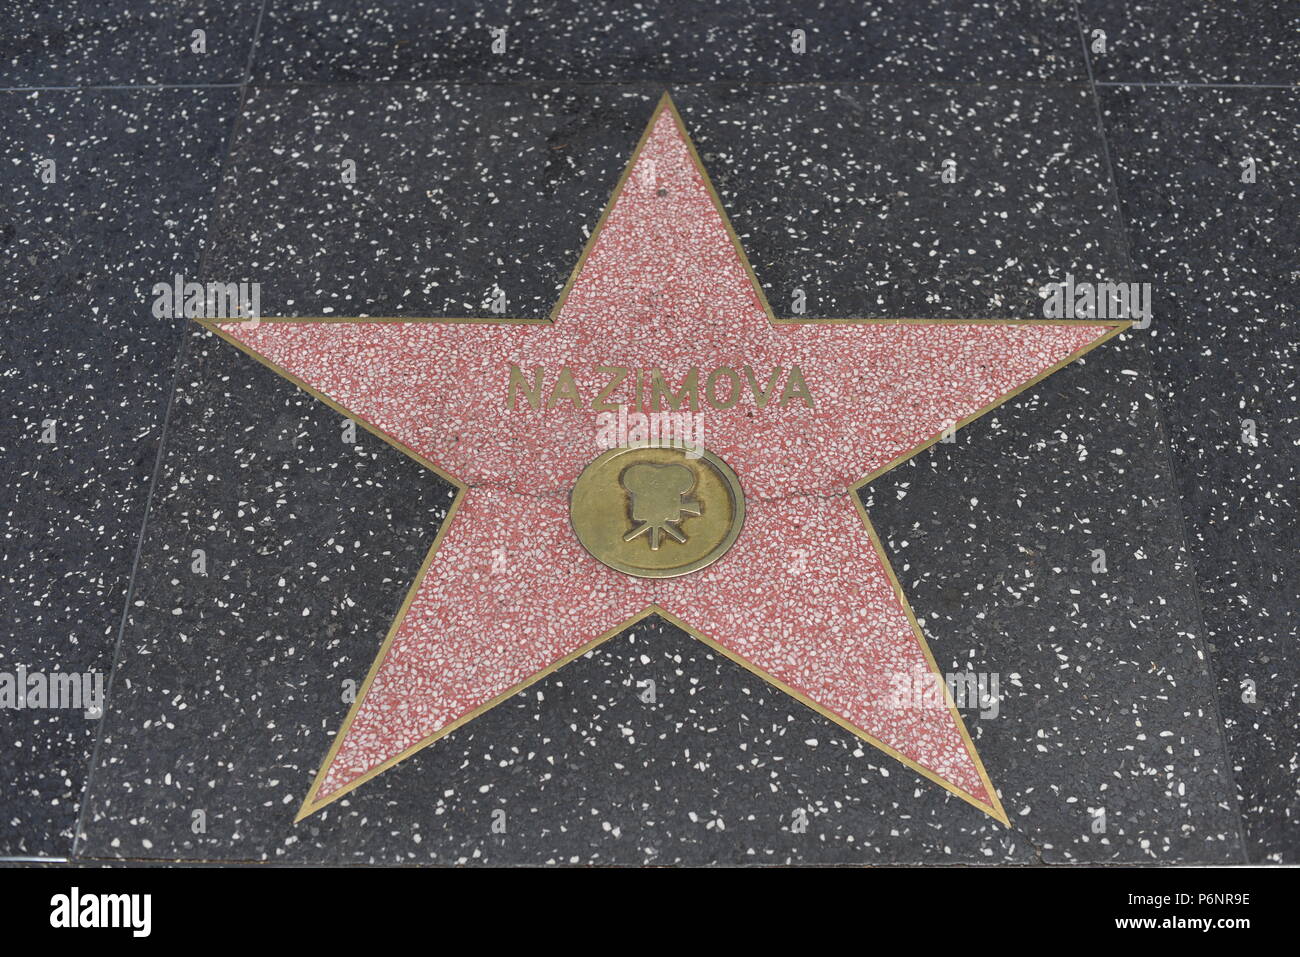 HOLLYWOOD, CA - June 29: Nazimova star on the Hollywood Walk of Fame in Hollywood, California on June 29, 2018. Stock Photo